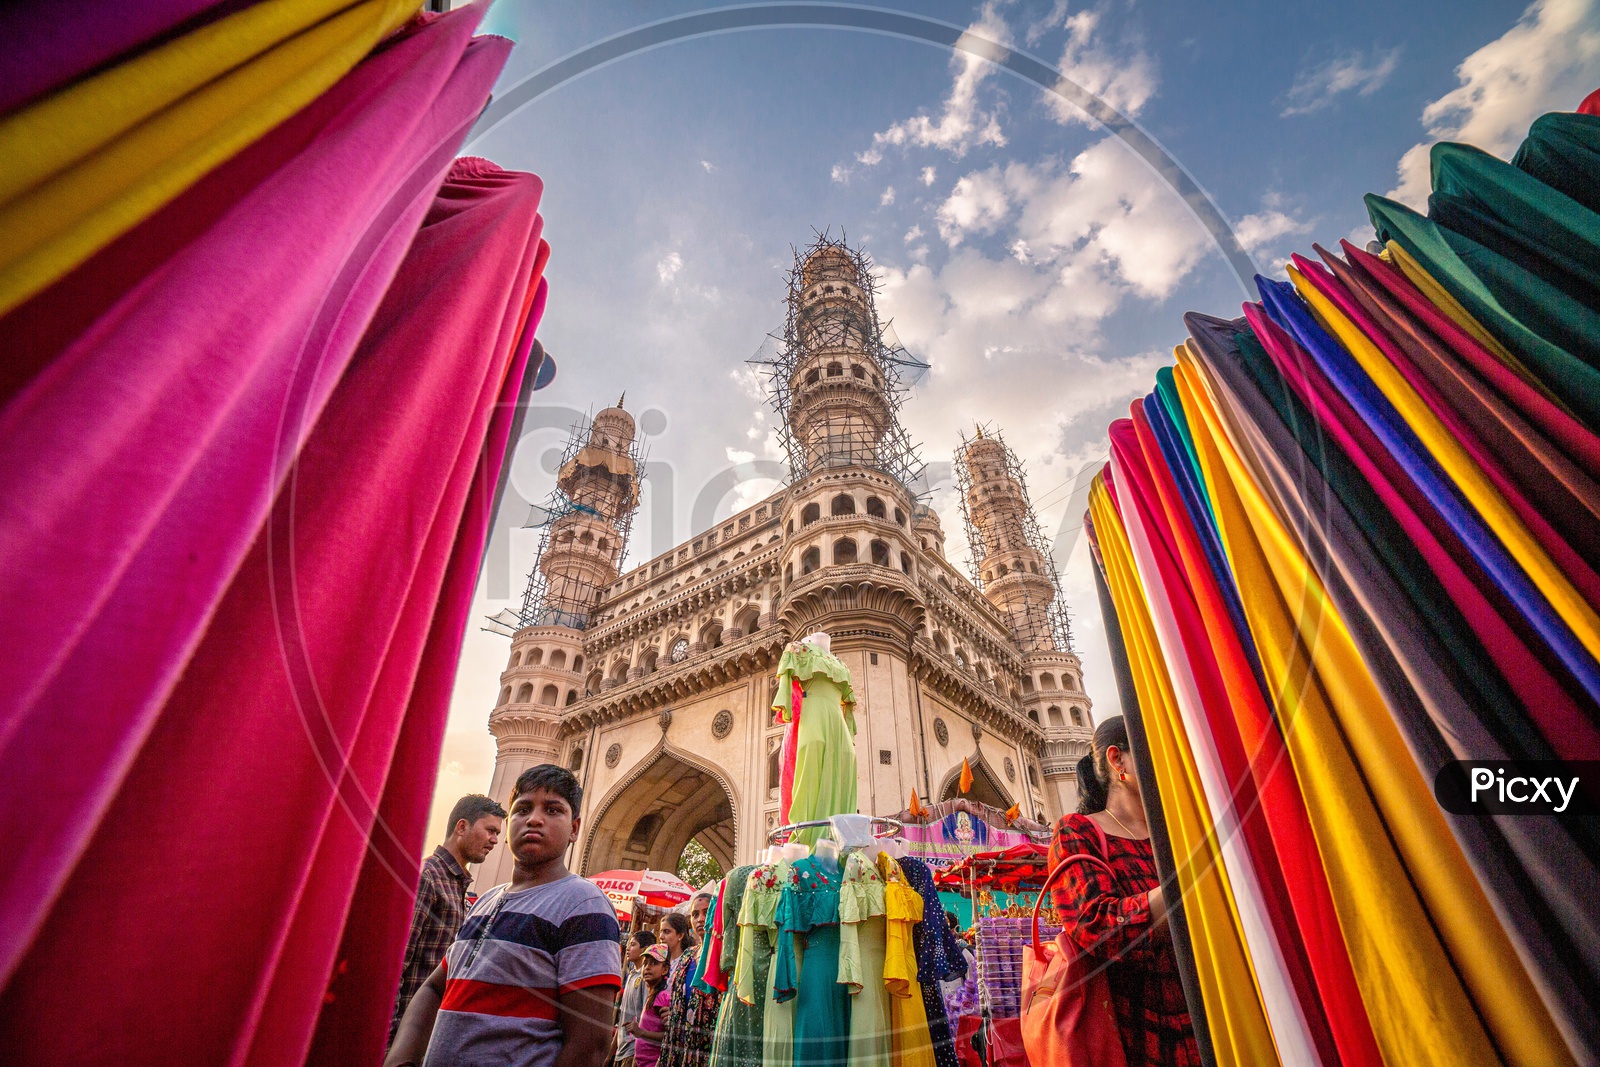 Charminar surrounded by colors